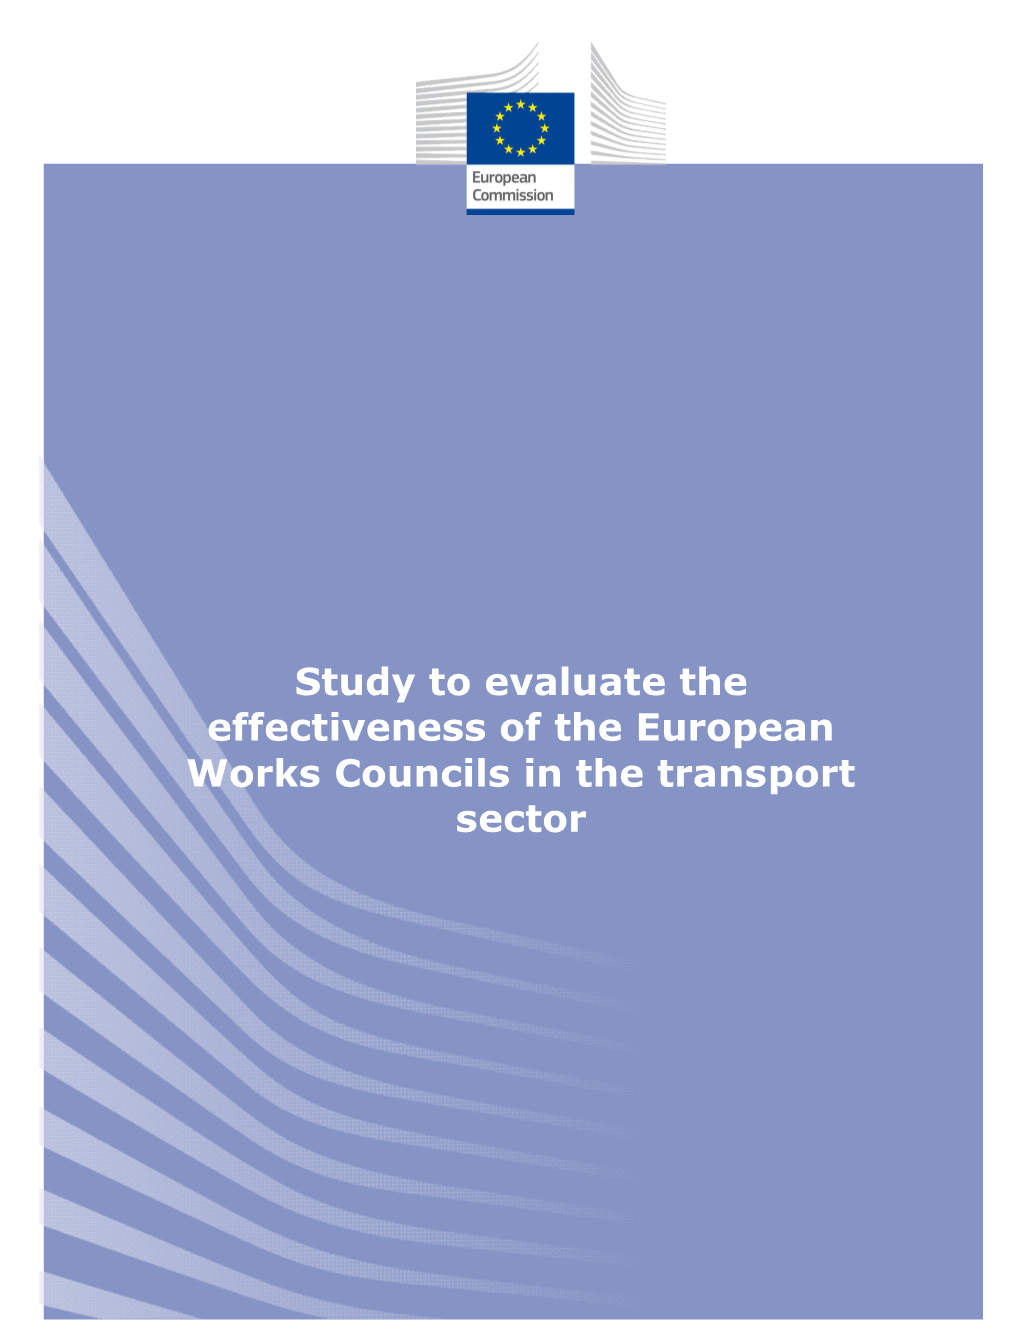 Study to Evaluate the Effectiveness of the European Works Councils in the Transport Sector